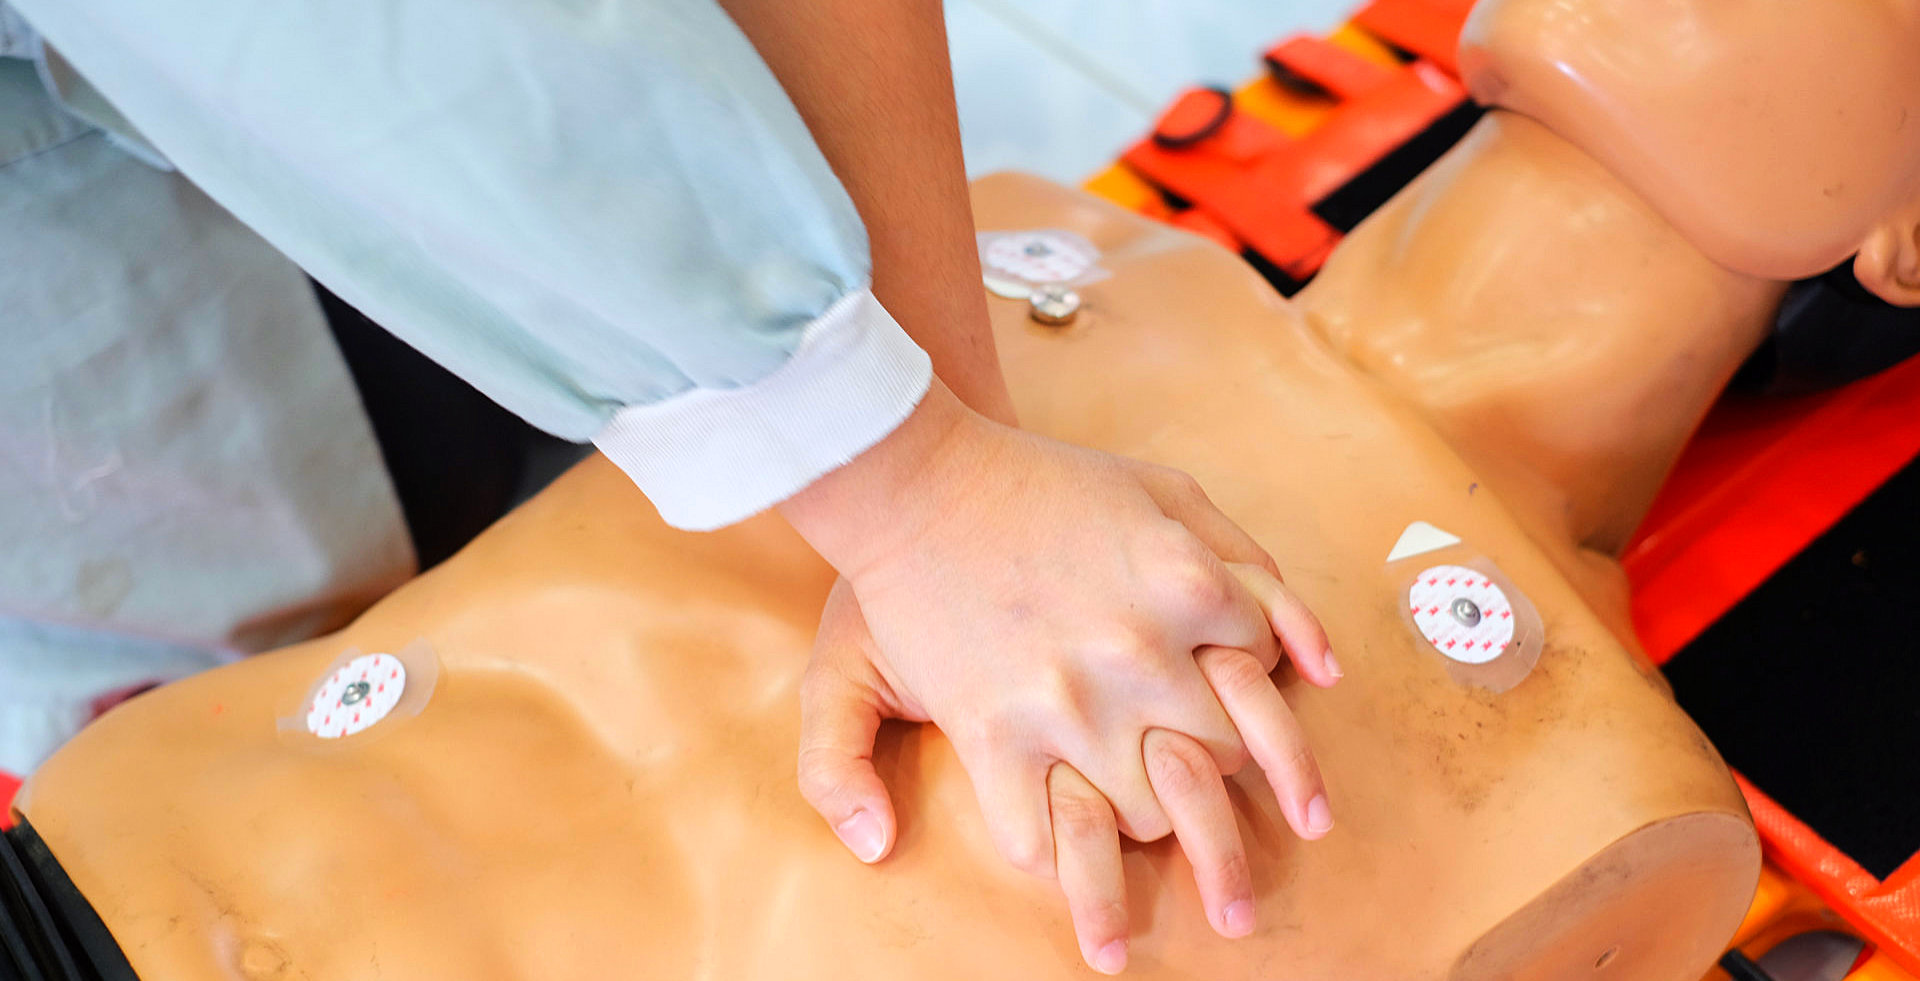 dummy being saved with basic cpr concept